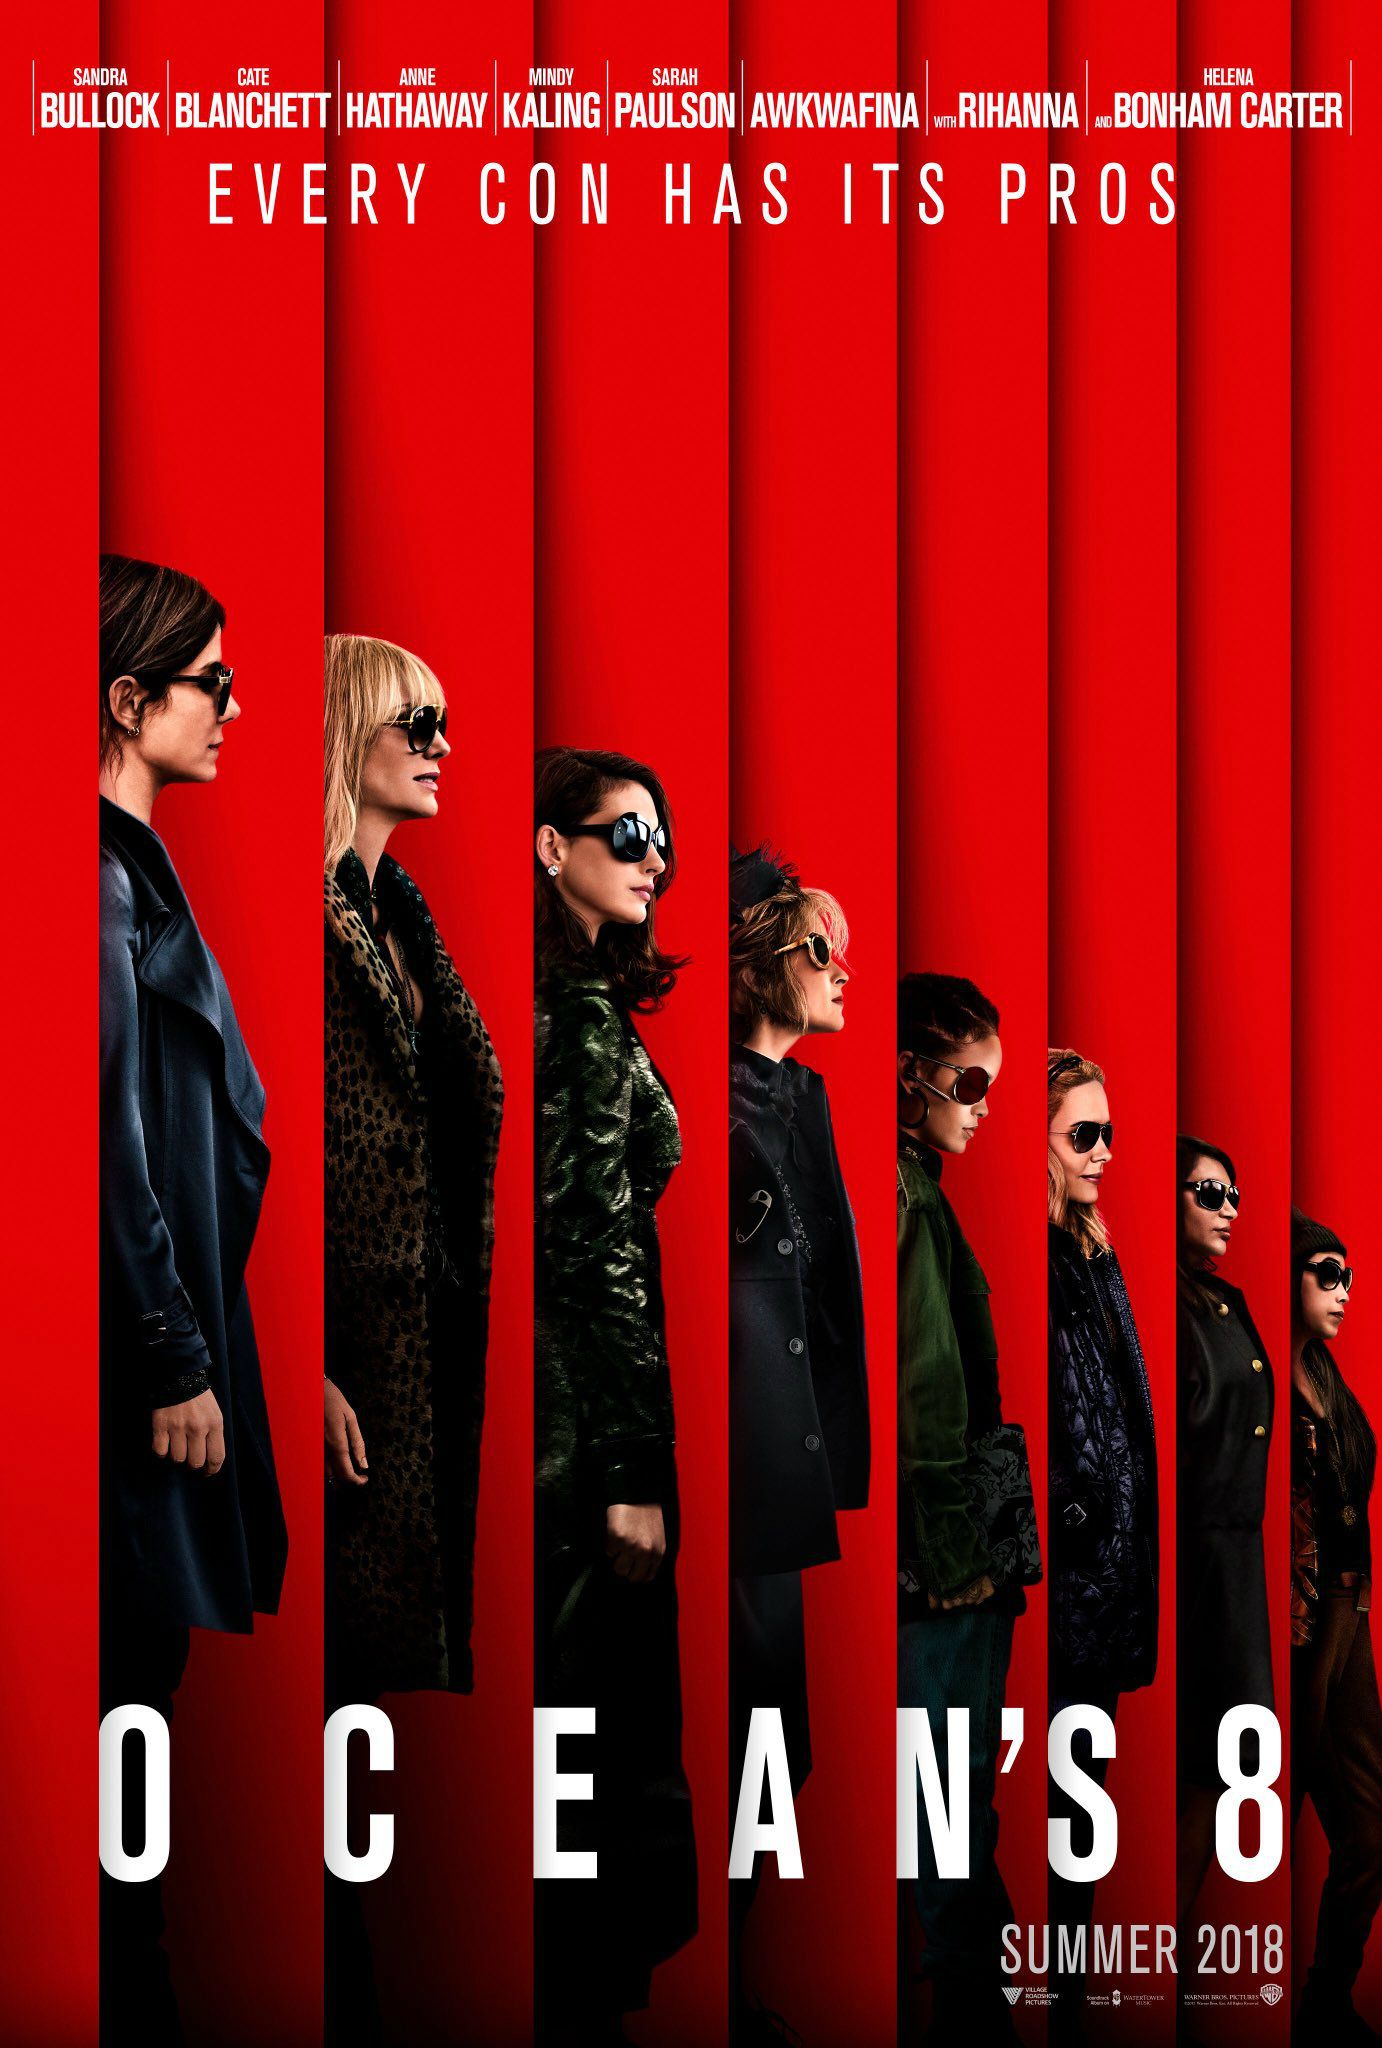 Ocean’s 8 Poster Lines Up The Movie’s All Star Cast